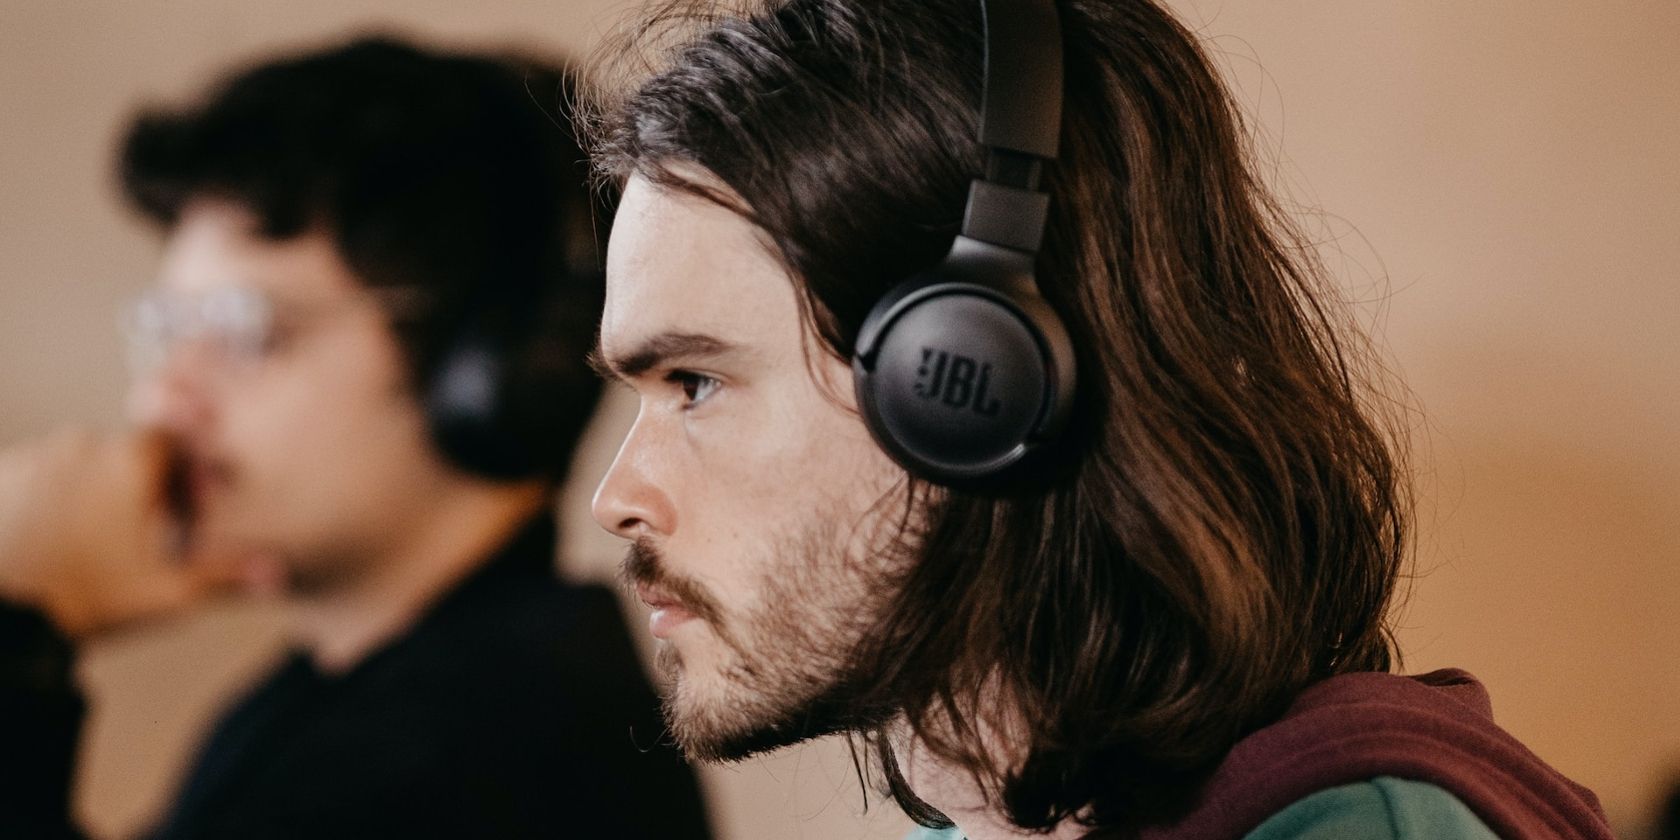 a person wearing headphones beside another person wearing headphones